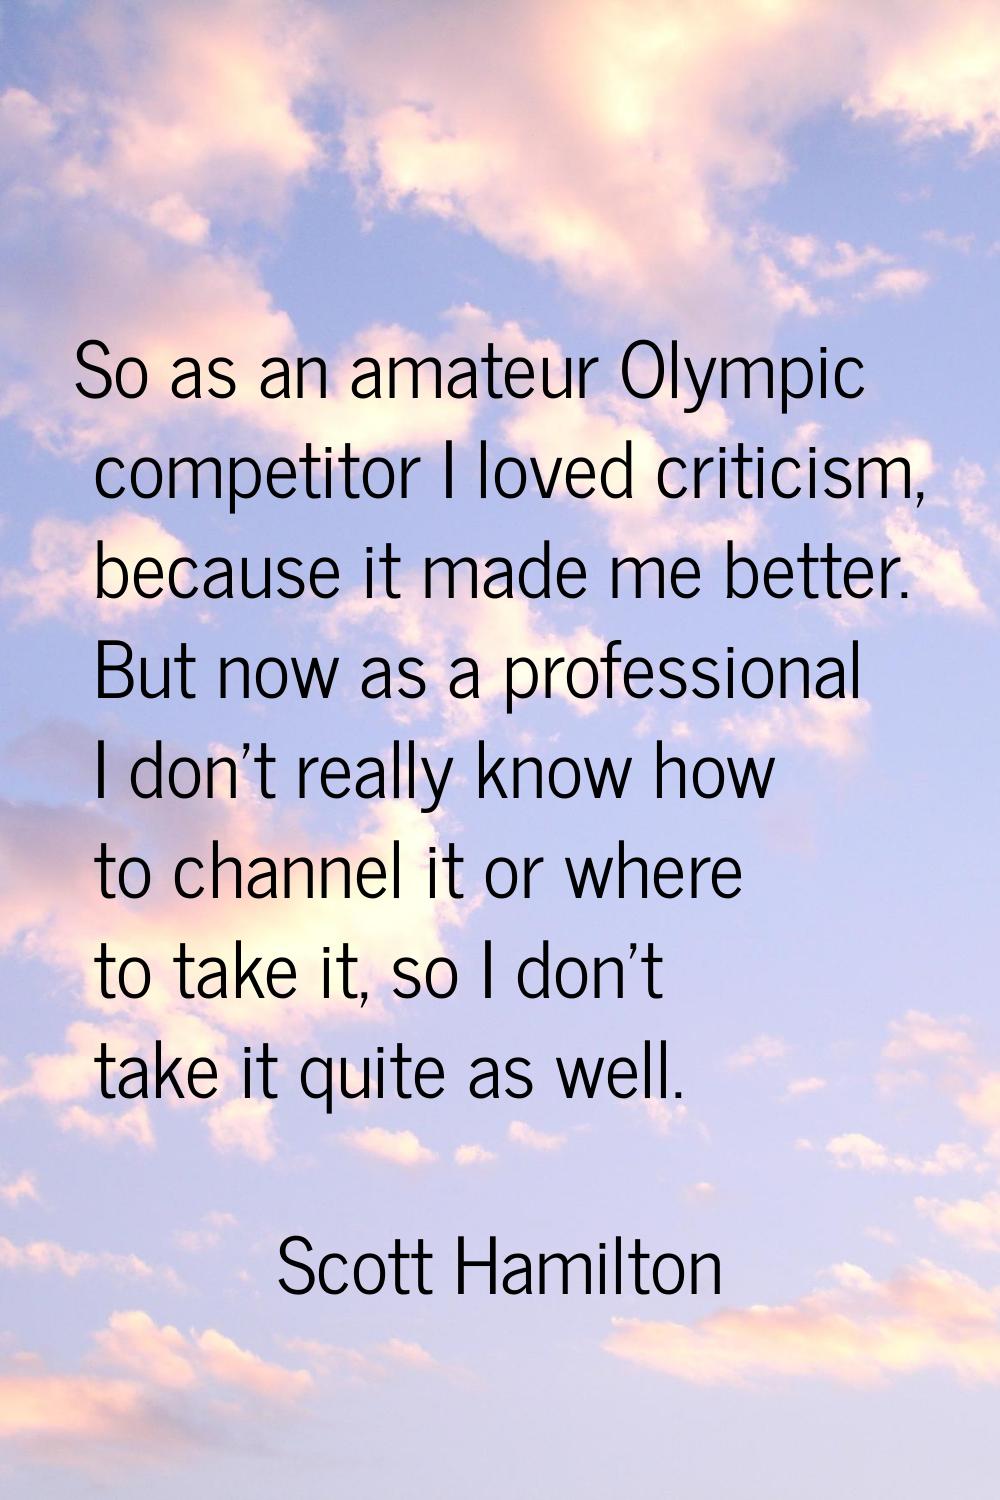 So as an amateur Olympic competitor I loved criticism, because it made me better. But now as a prof